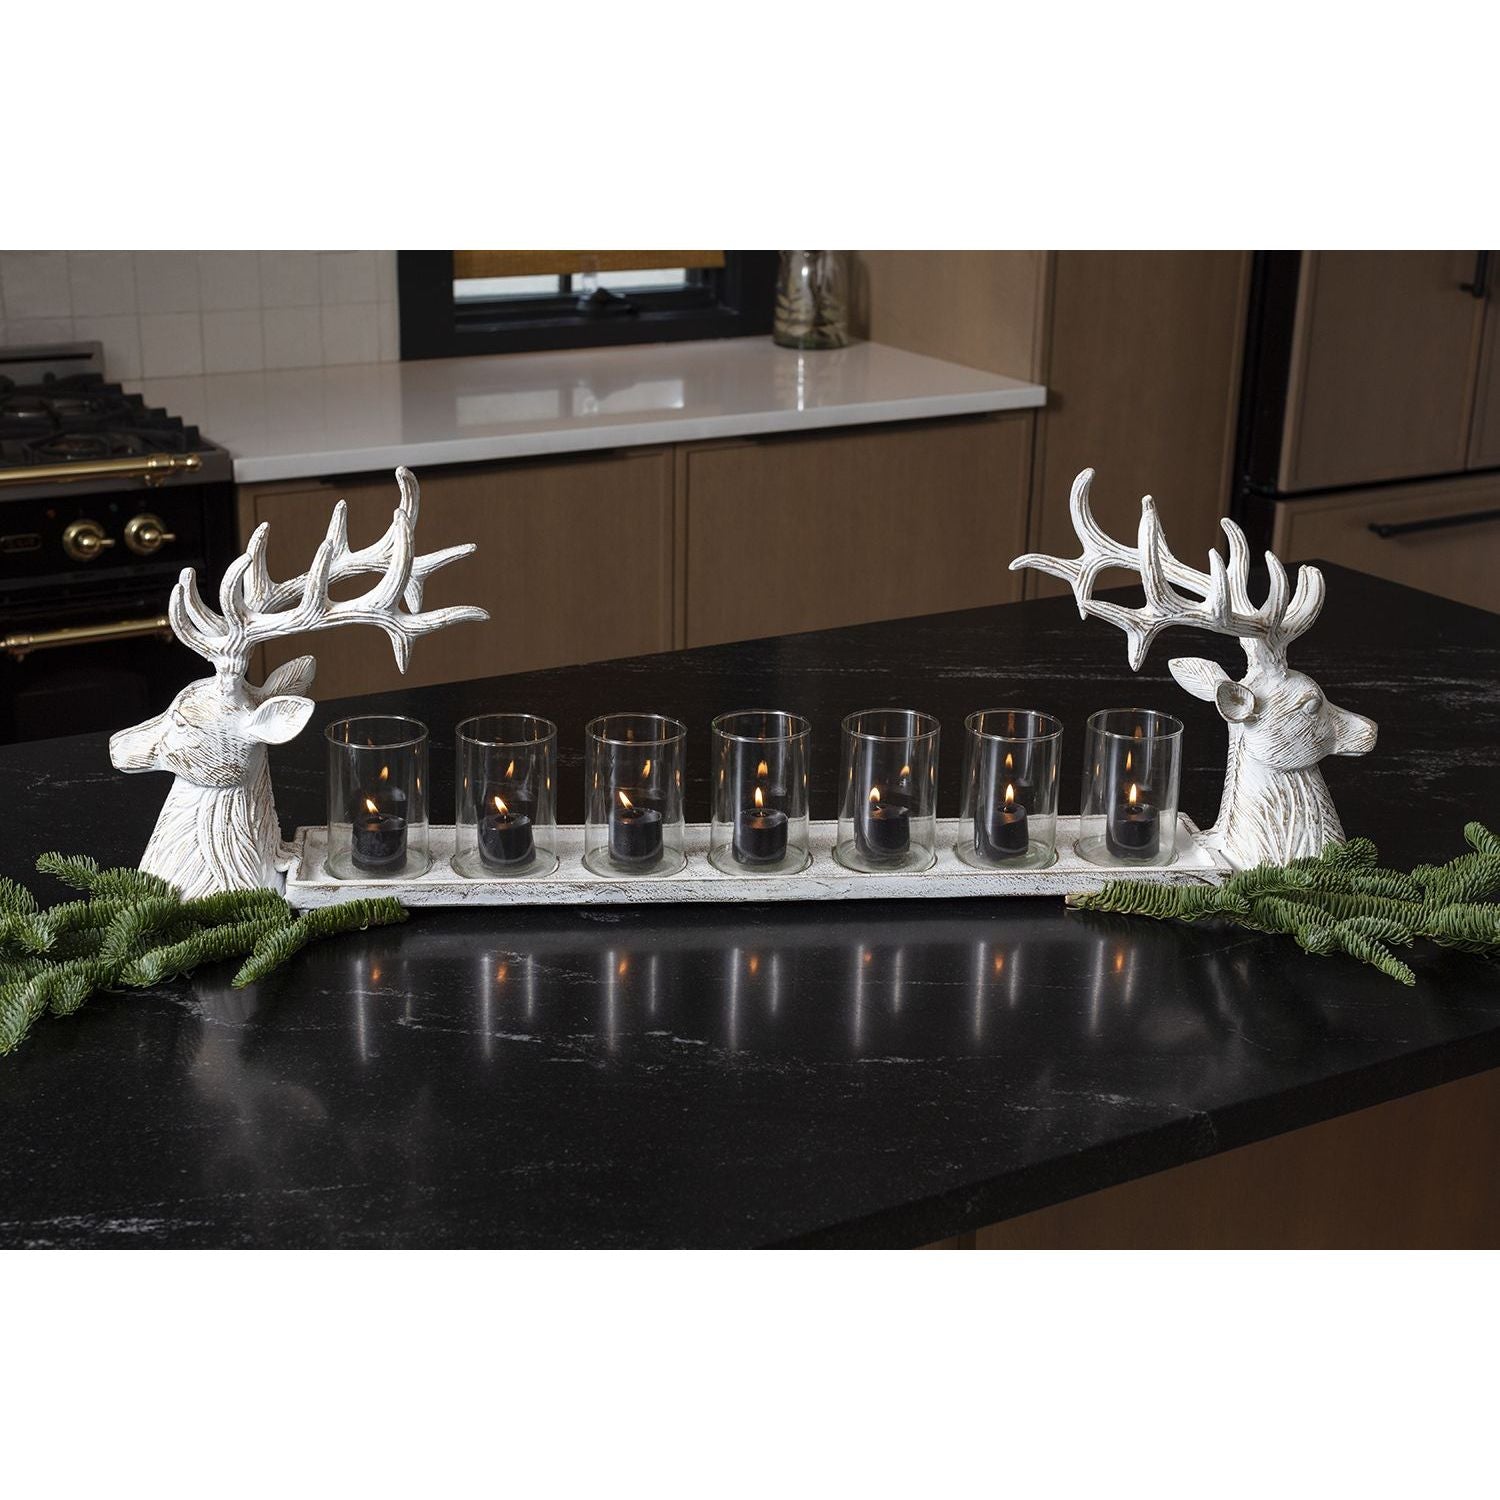 A rectangular black countertop displays a Reindeer Candleholder measuring 35.0 x 6.5 x 11.5 inches. The centerpiece features a row of seven black candleholders with small lit candles inside, mounted on a base with two white reindeer head sculptures on either end, and green artificial pine branches arranged around the base.